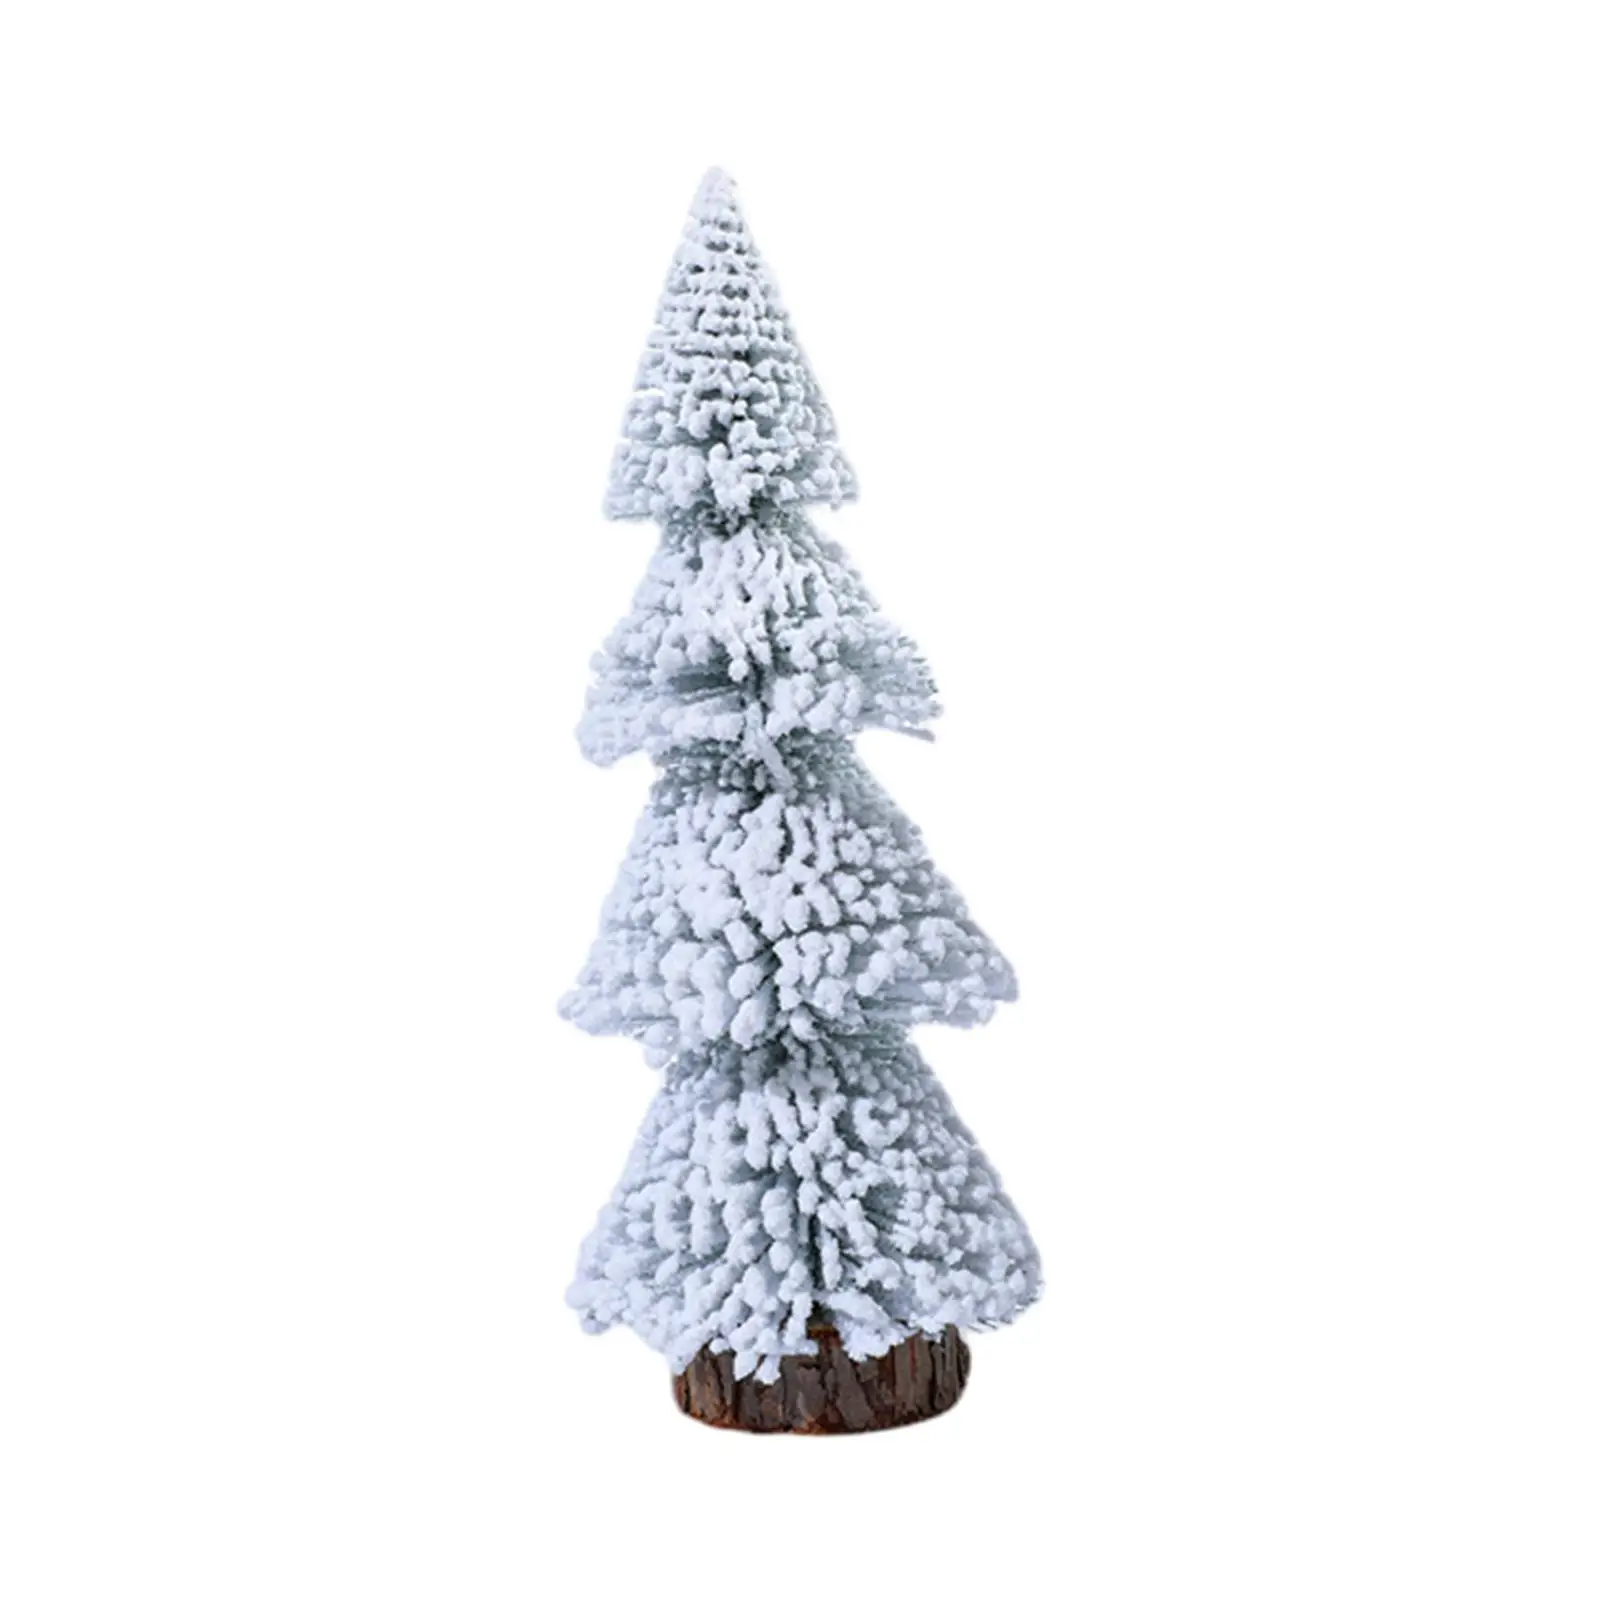 Tabletop Christmas Tree Display Vintage Rustic Wood Base Snow Flocked Christmas Tree for Table Home Fireplace Indoor Decorations